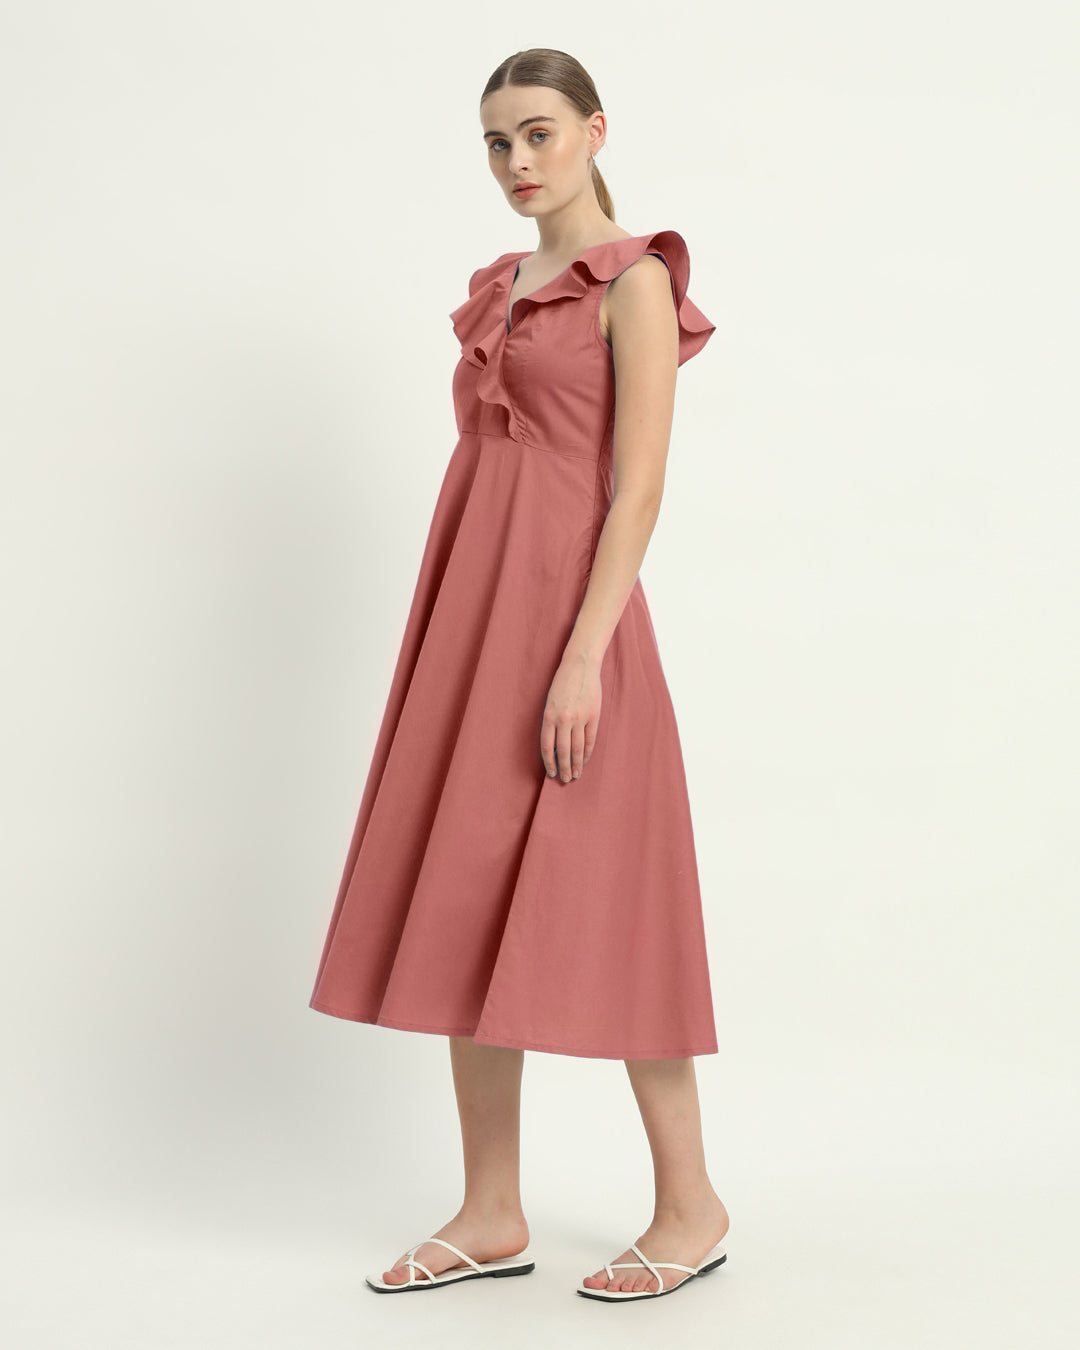 The Ivory Pink Albany Cotton Dress